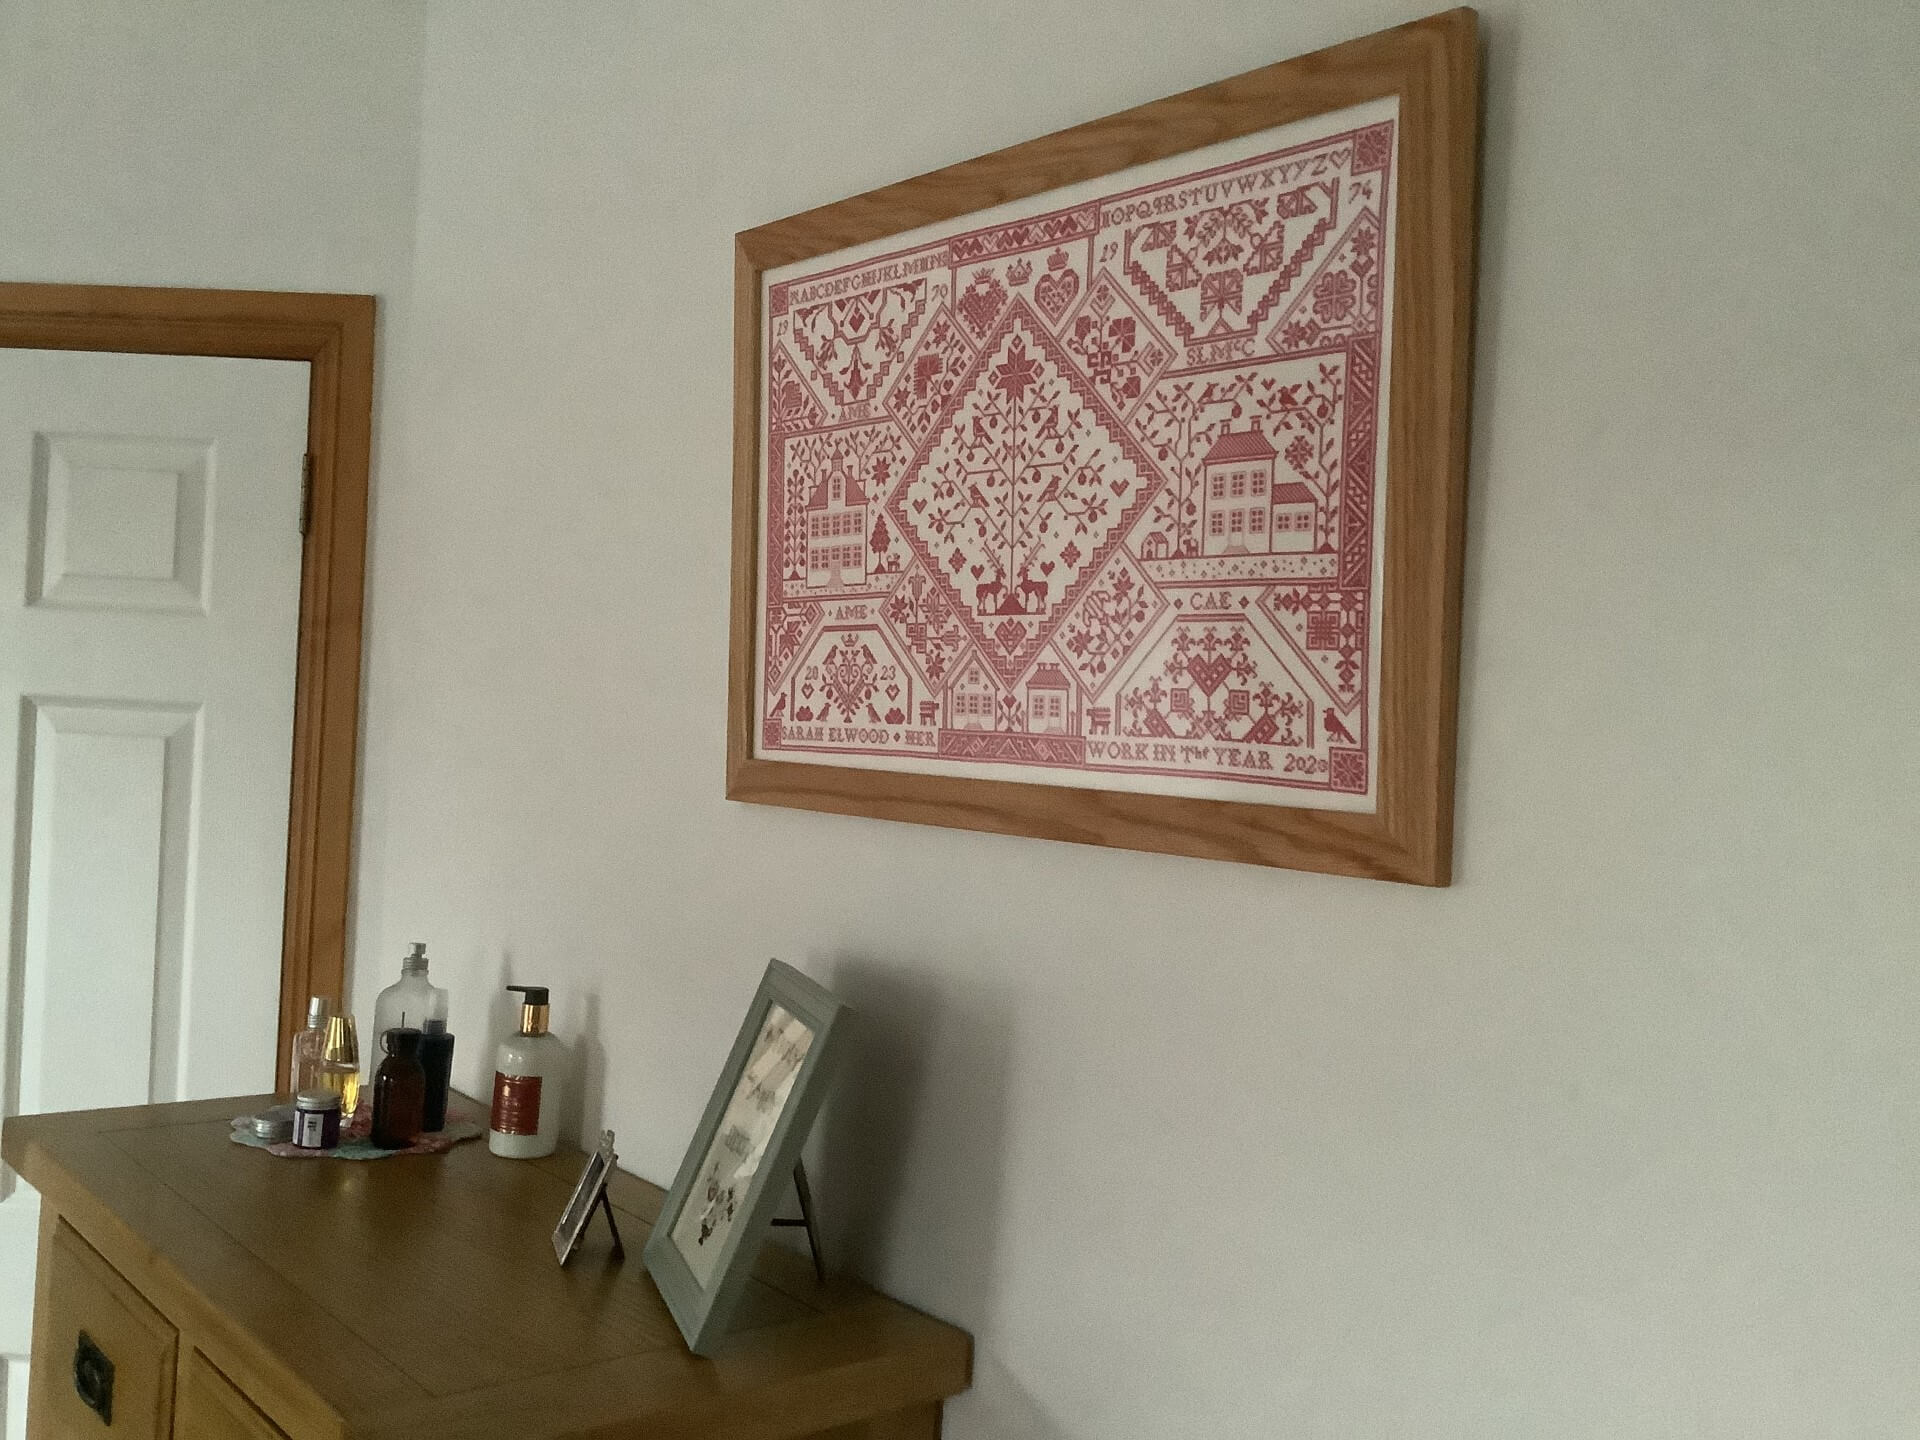 Sarah Elwood's A Family Patchwork Sampler by Modern Folk Embroidery hanging in wooden frame